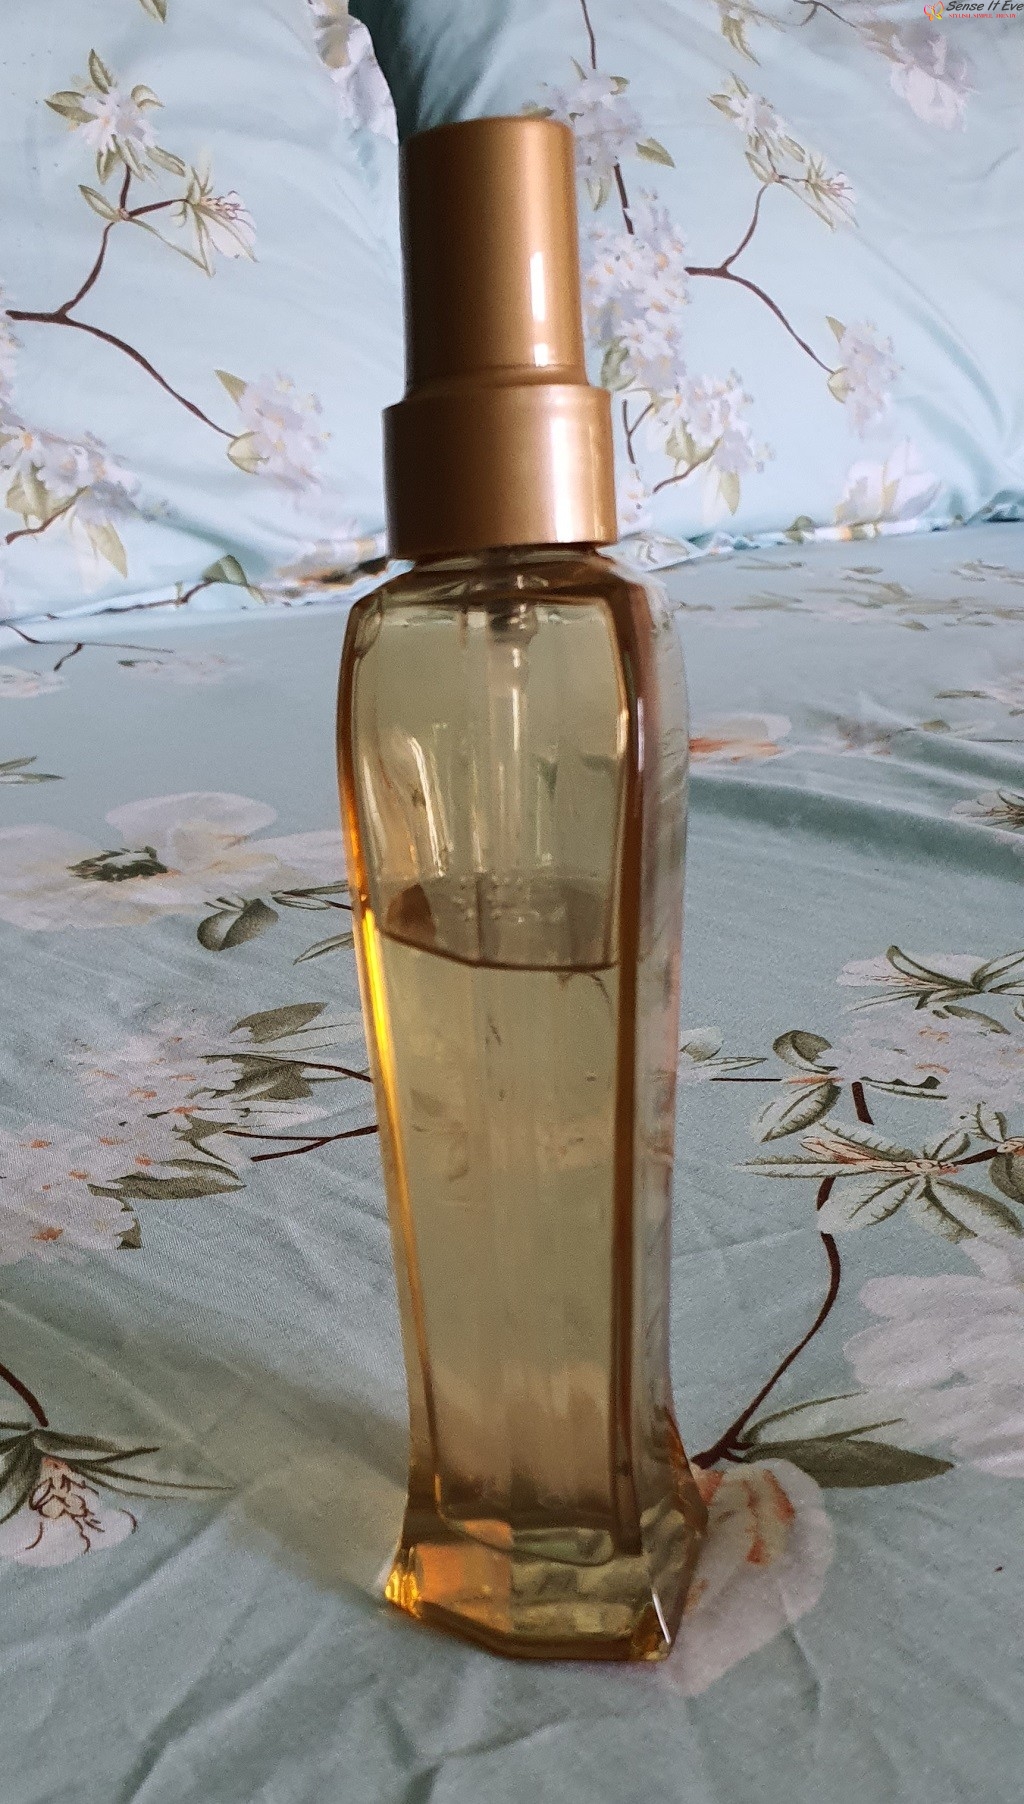 Loreal Professional Mythic Oil Bottle Sense It Eve L'oreal Mythic Oil Review: A Miracle Product for Dry, Frizzy Hair?